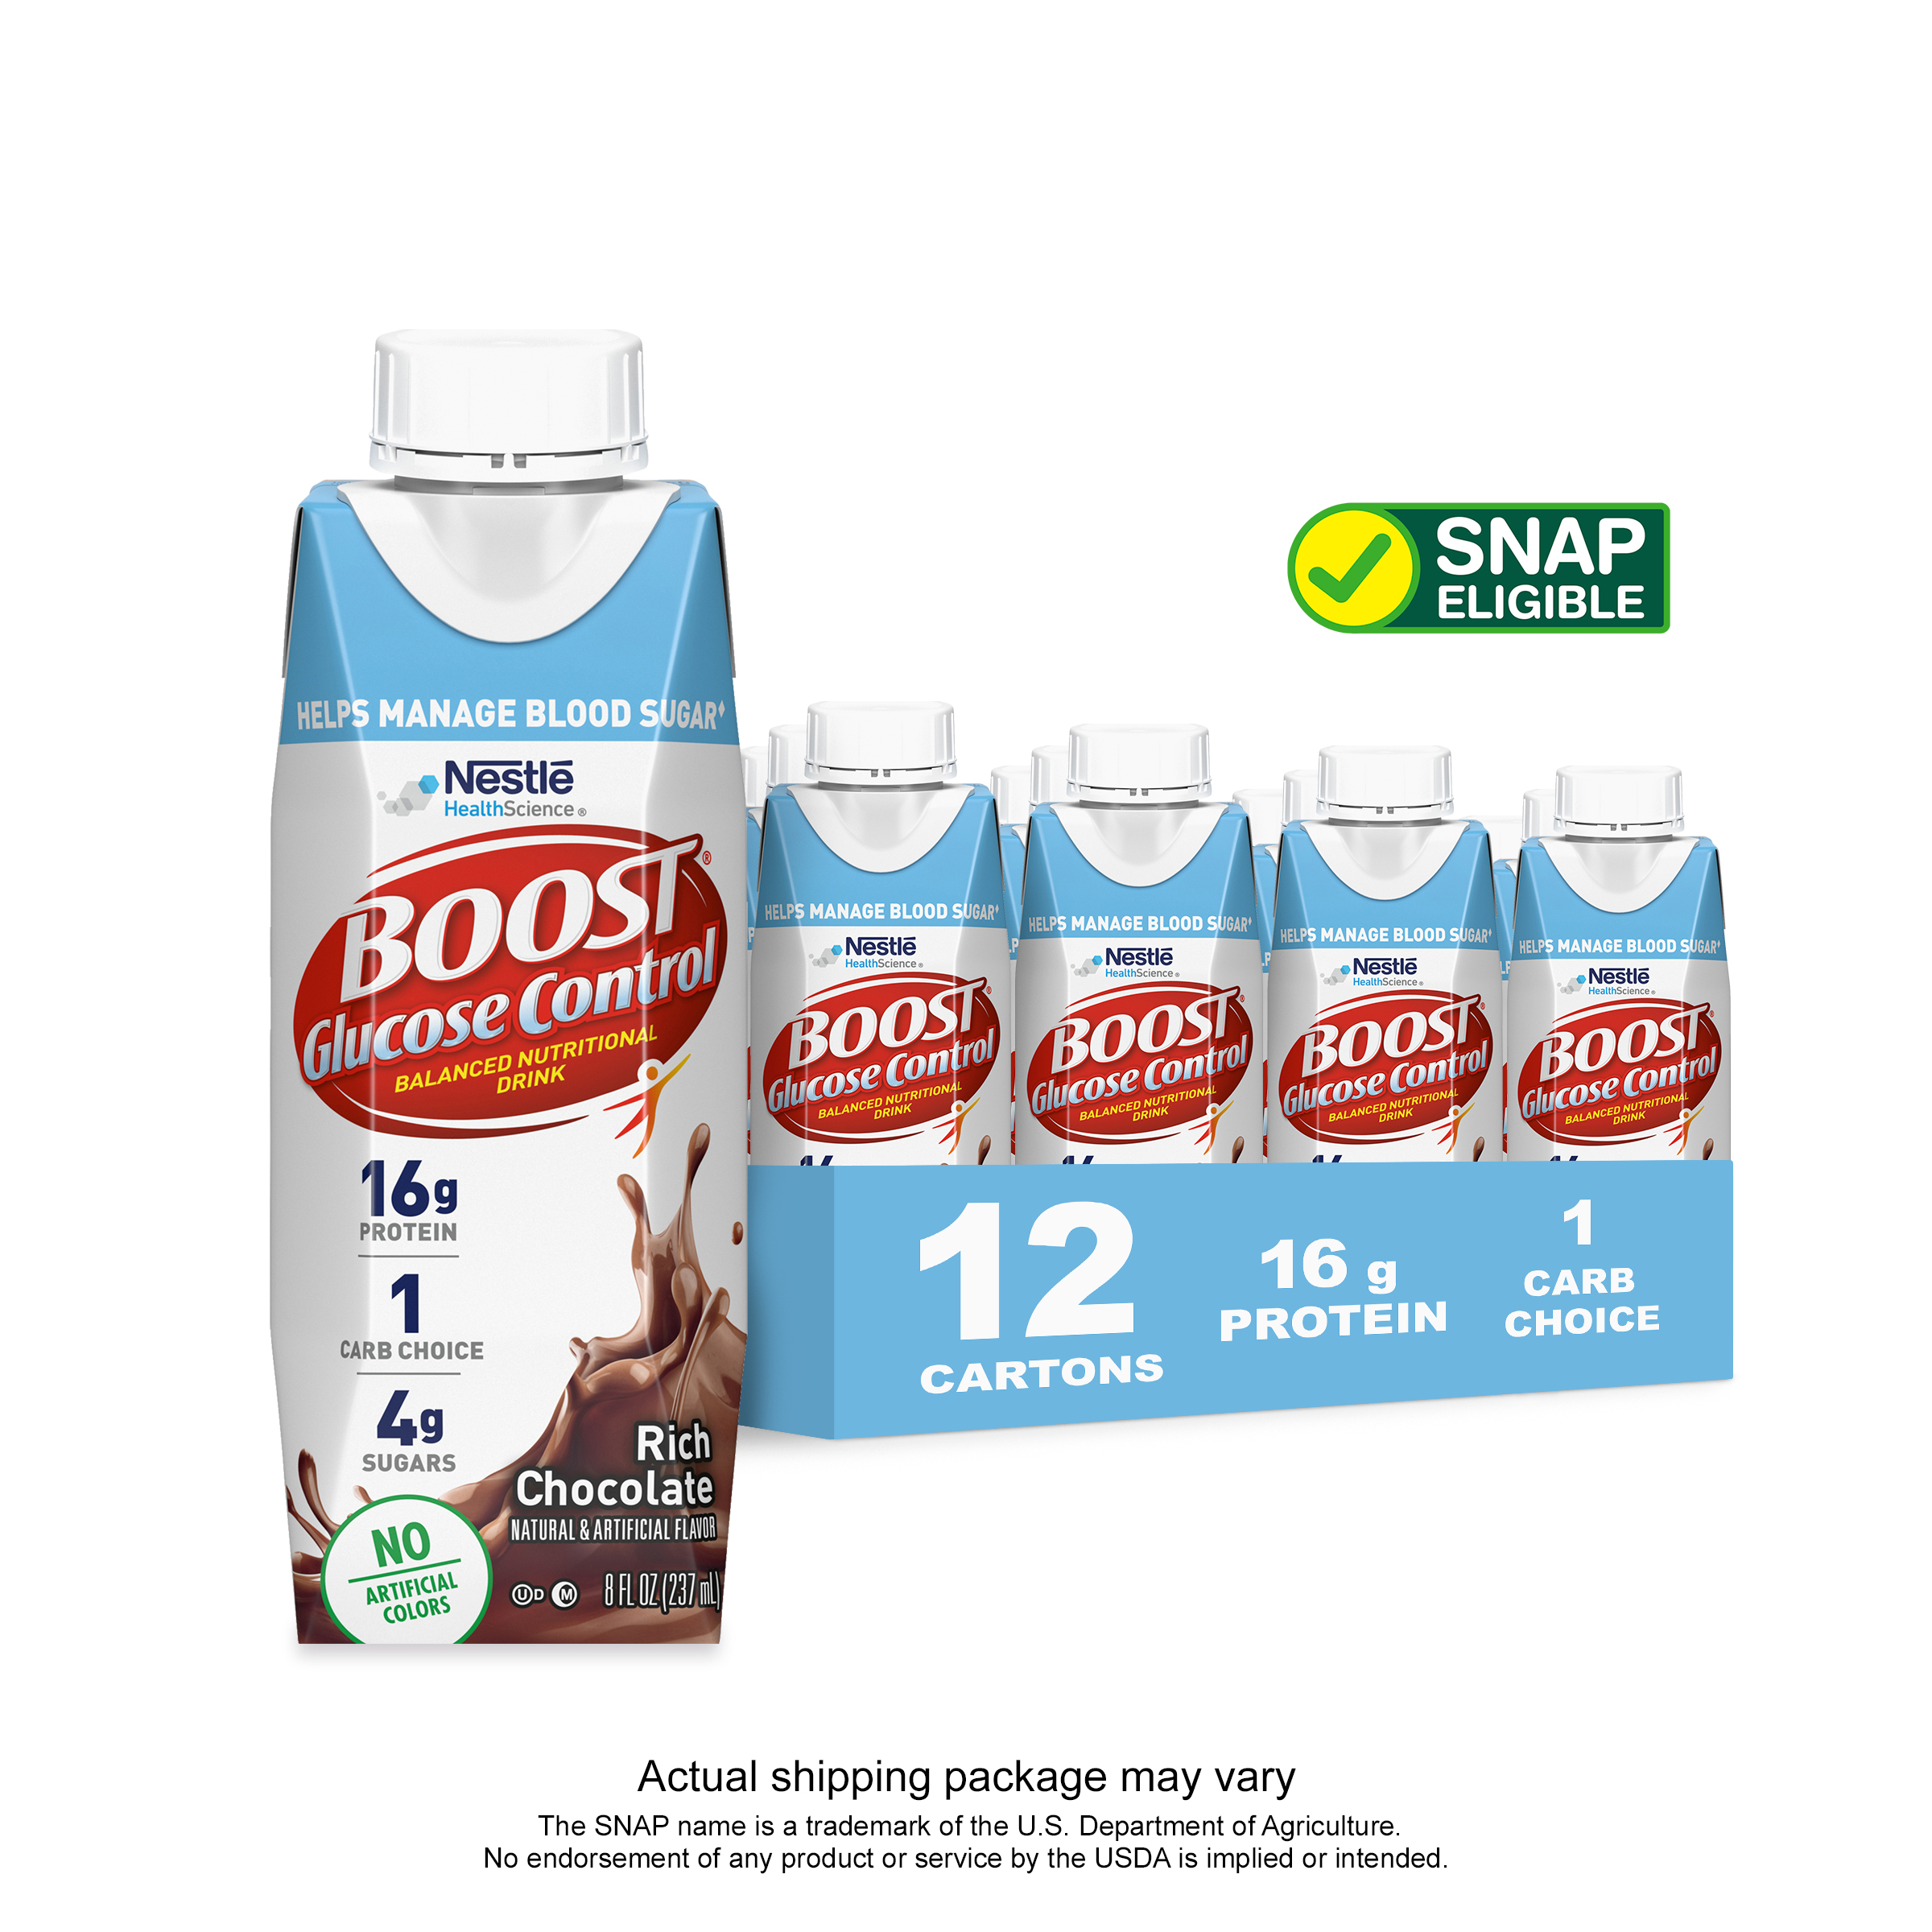 BOOST Glucose Control Nutritional Drink, Rich Chocolate, 16 g Protein, 12 - 8 fl oz Cartons - image 1 of 9